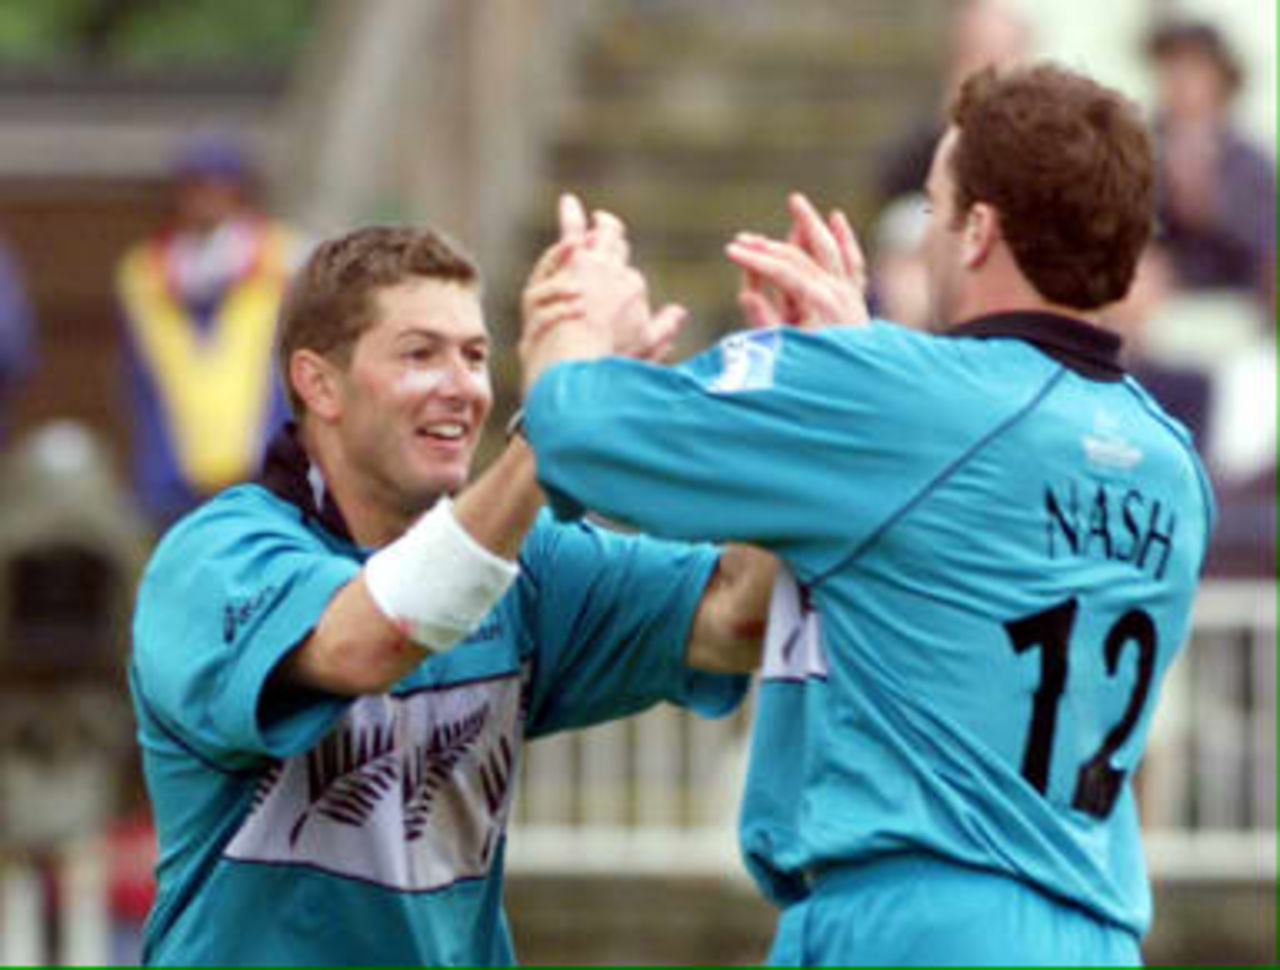 New Zealand bowler Geoff Allott (L) celebrates with Dion Nash who ran out South Africa's captain Hansie Cronje 10 June 1999. Allott had earlier broken the world record for wickets taken in a World Cup series with 19 during their Super Six match in the Cricket World Cup at Edgbaston